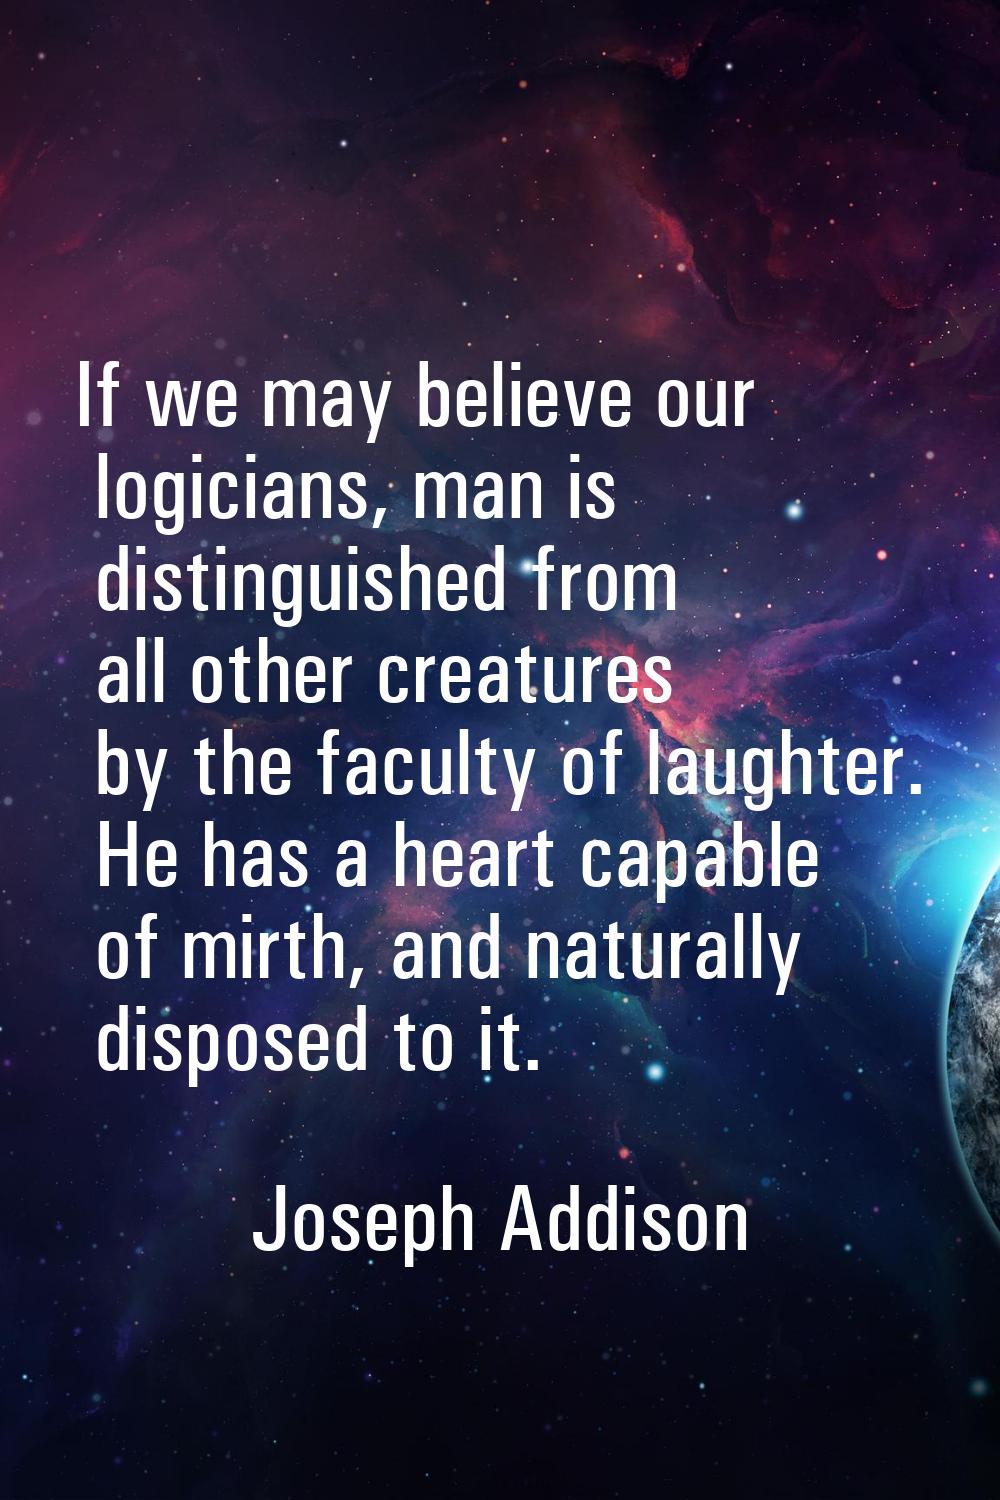 If we may believe our logicians, man is distinguished from all other creatures by the faculty of la